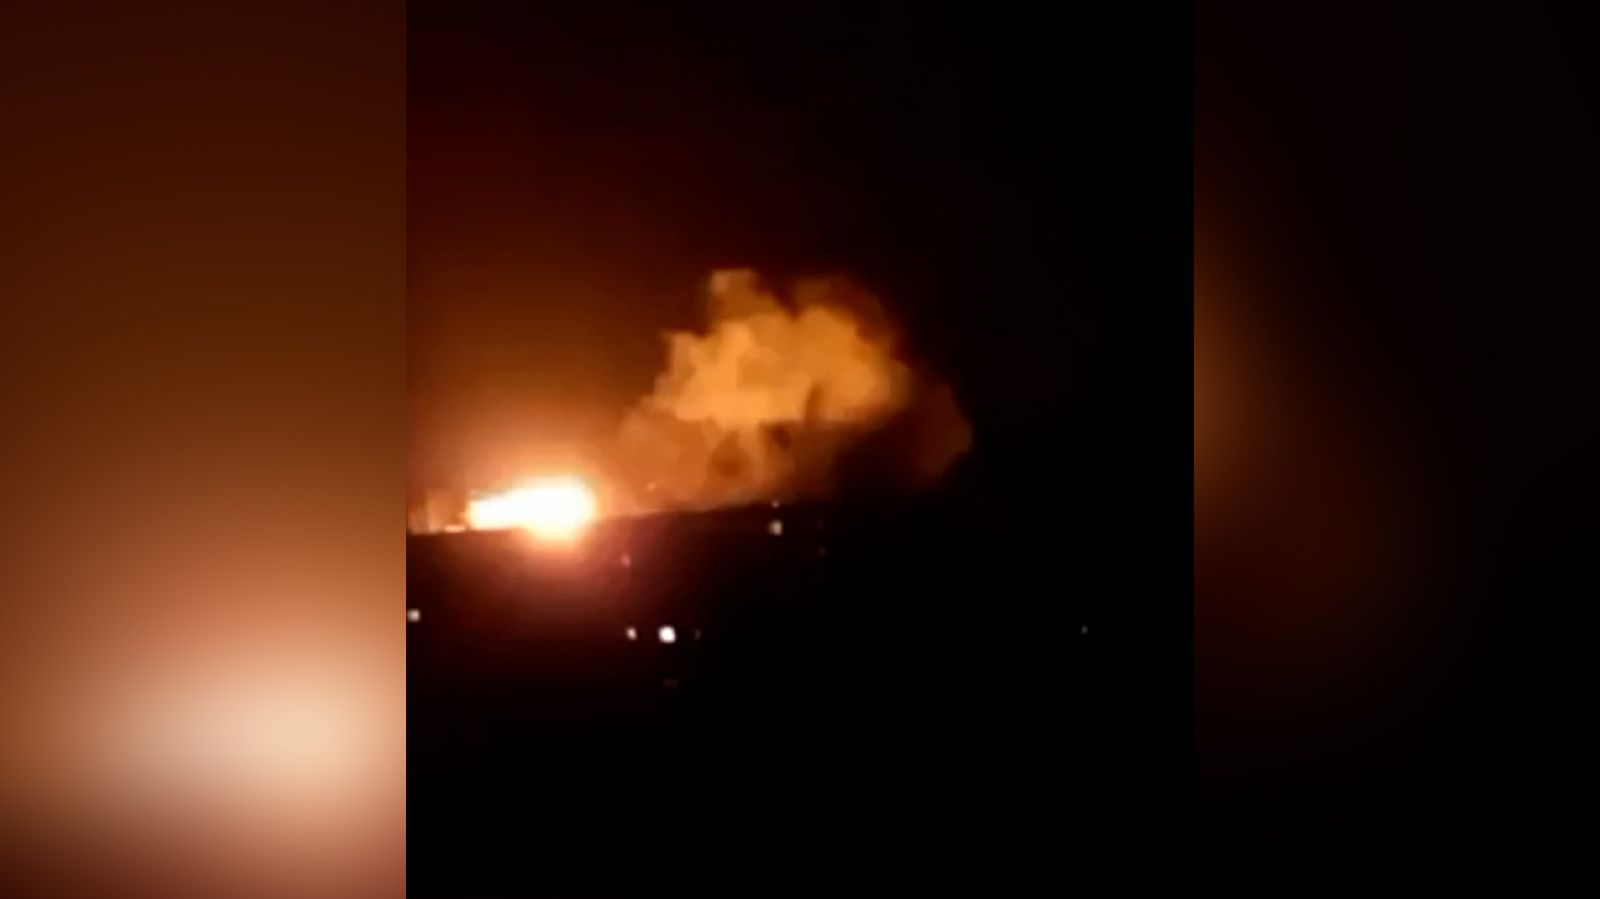 Heavy shelling erupted in Mykolaiv, Ukraine, on Friday, March 11.